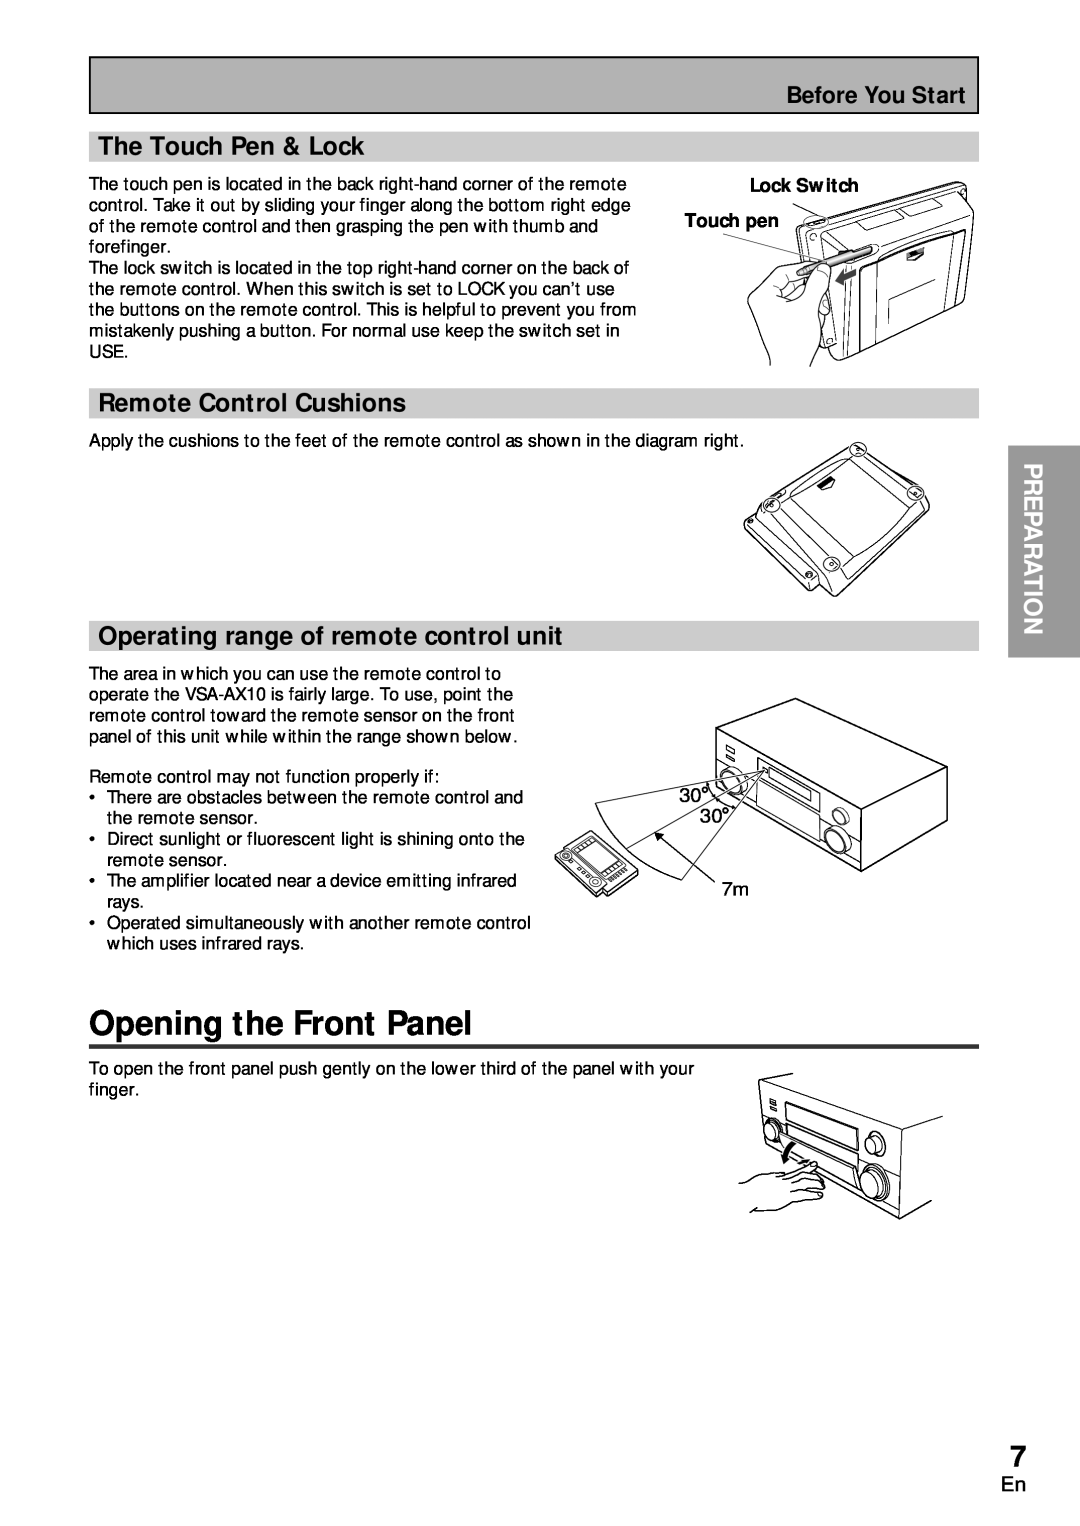 Pioneer VSA-AX10 operating instructions Opening the Front Panel, The Touch Pen & Lock, Remote Control Cushions, Preparation 